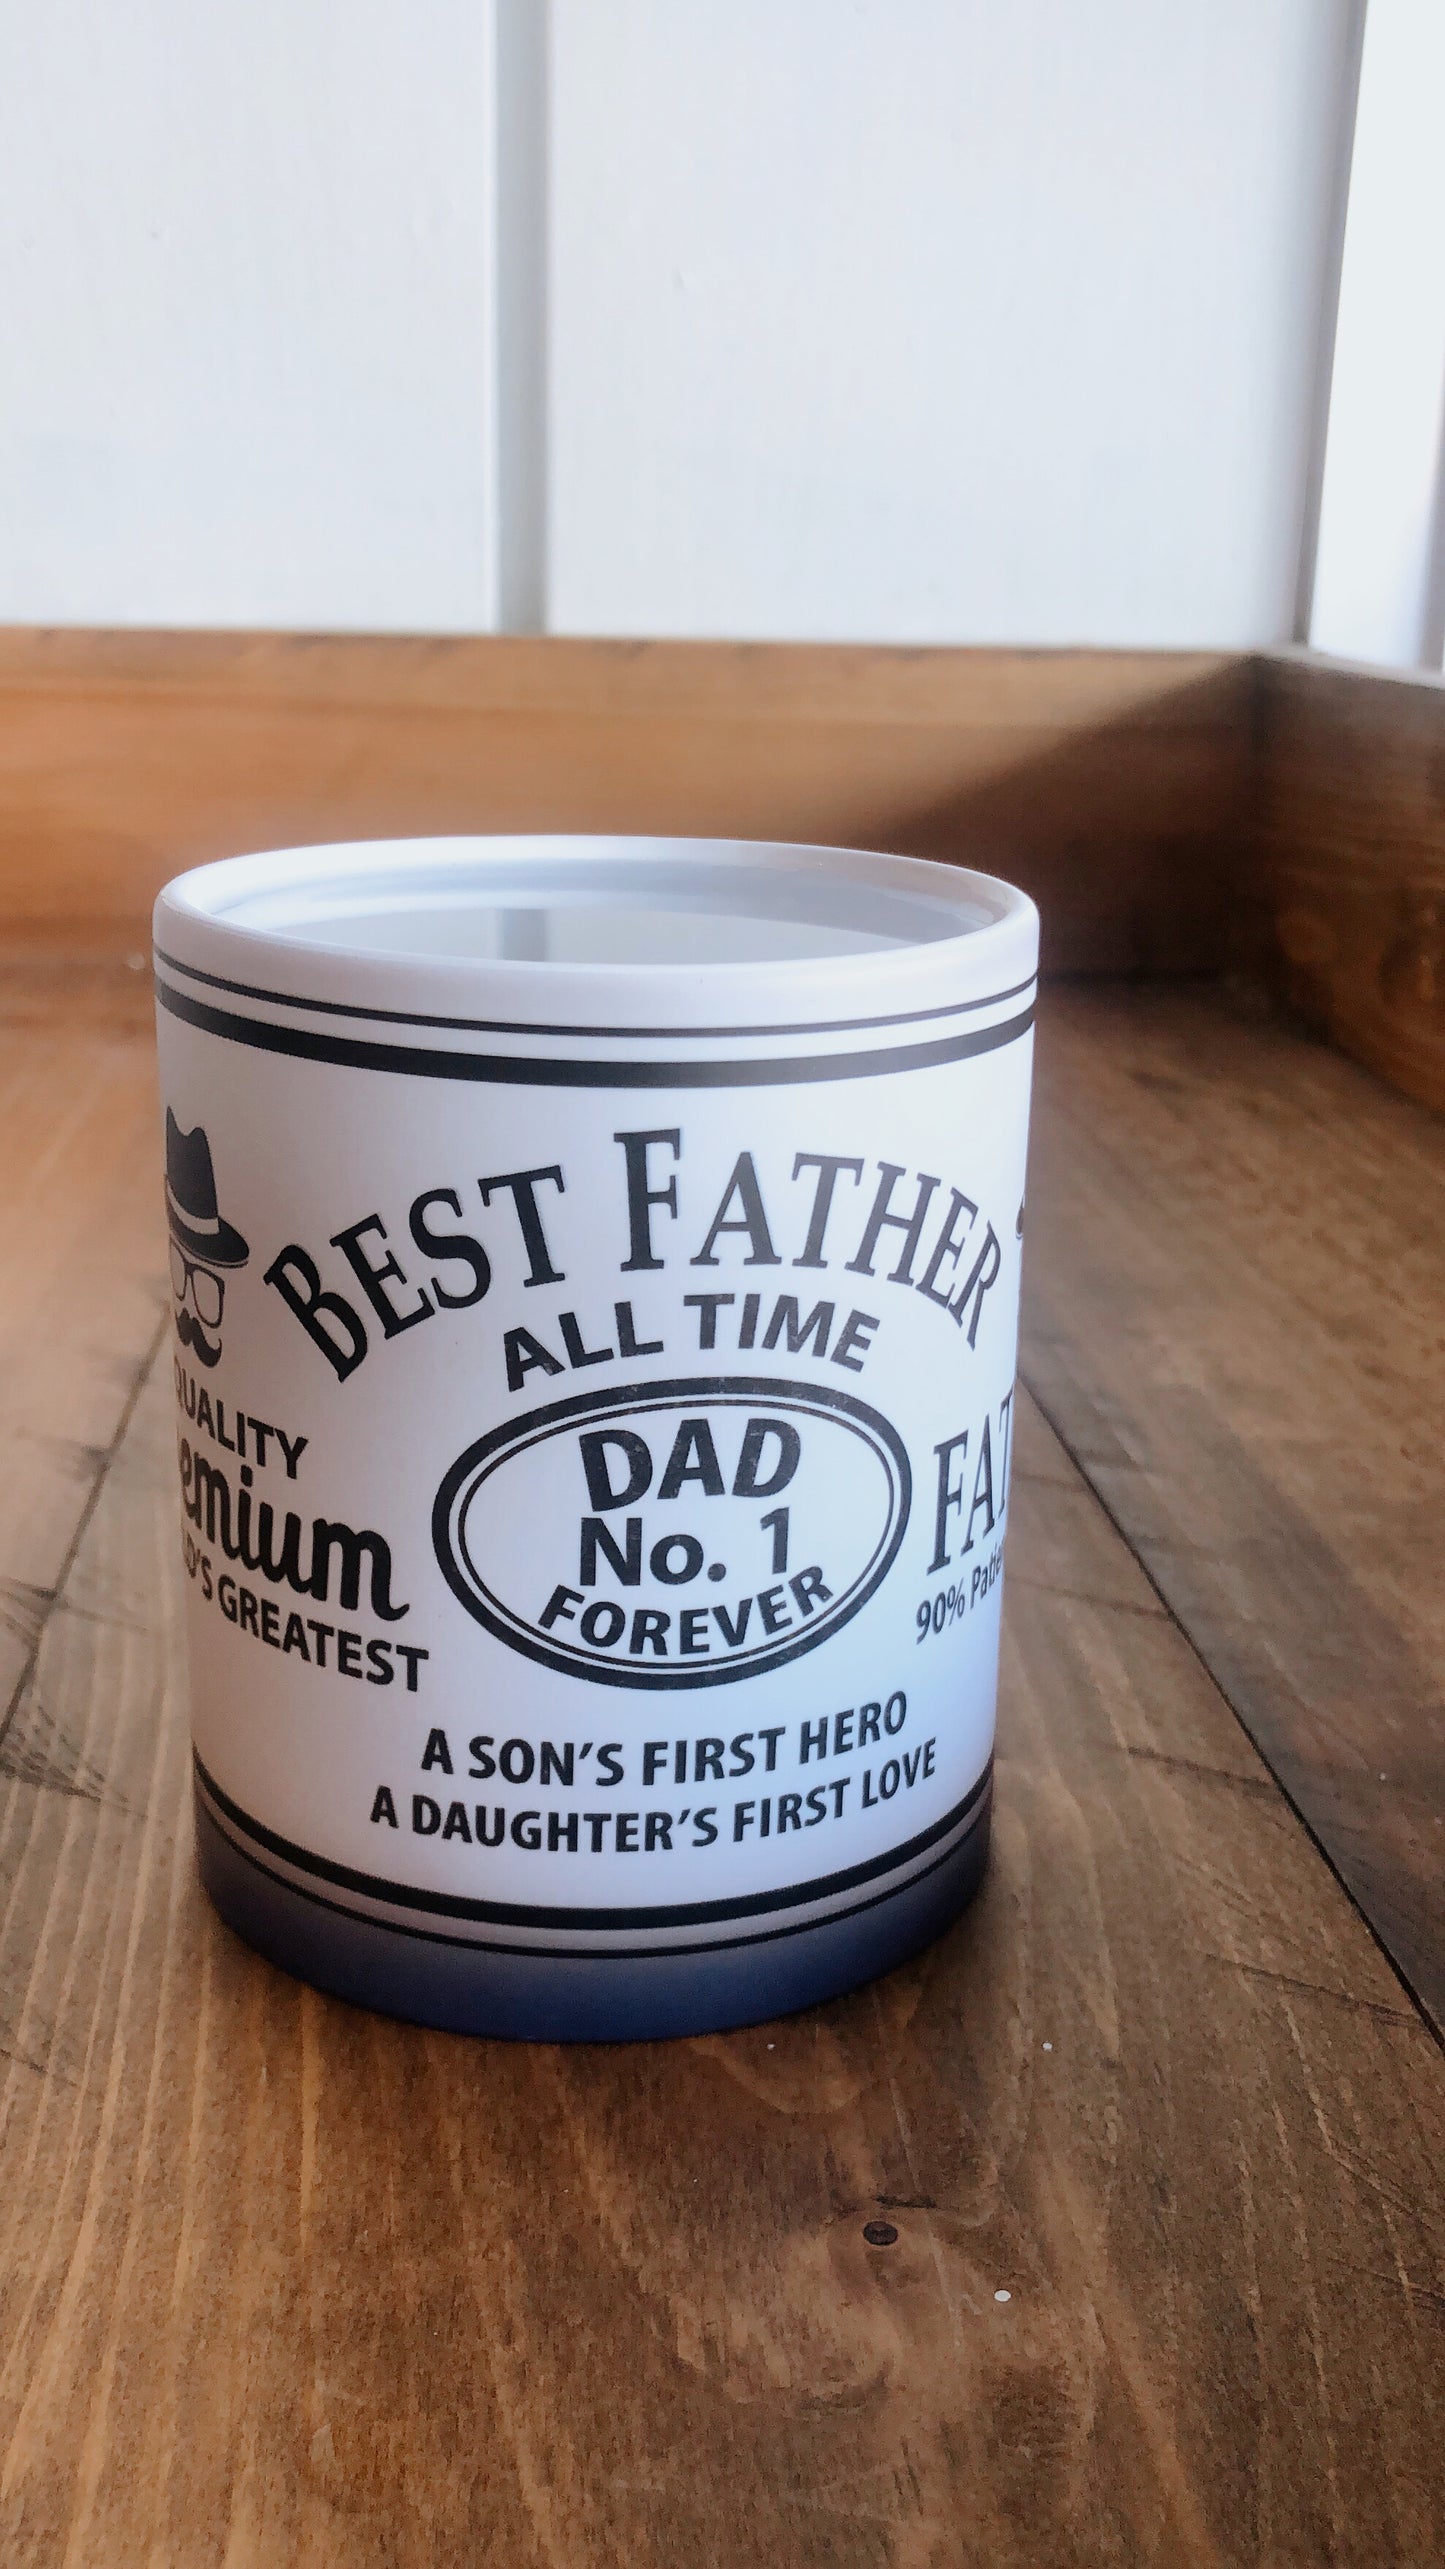 All Time Best Father Mug